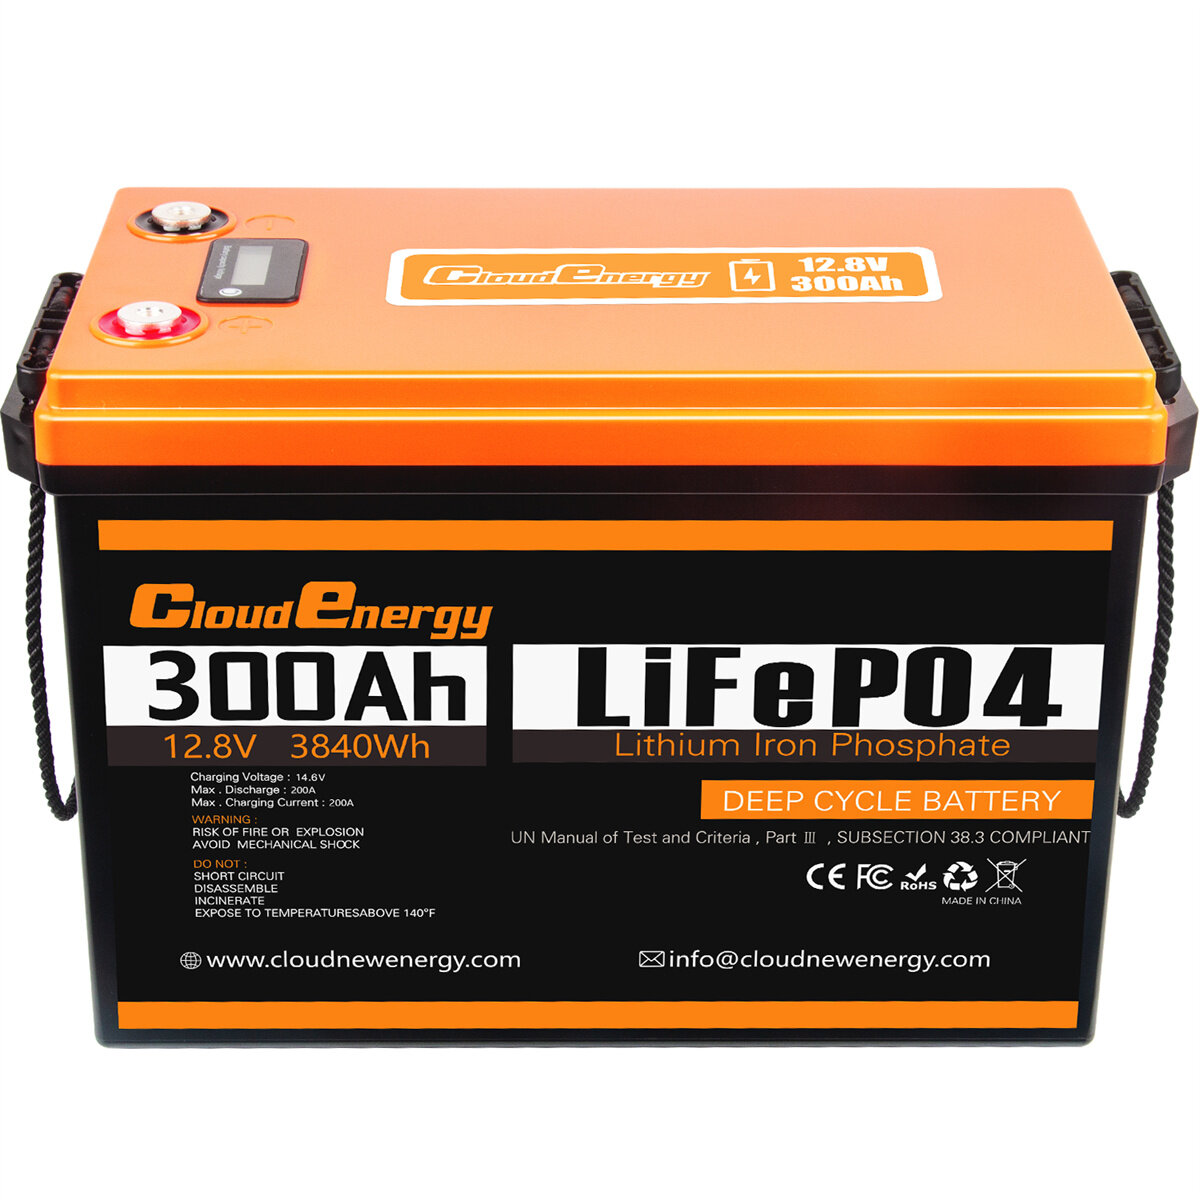 Image of [EU DIRECT] Cloudenergy 12V 300Ah LiFePO4 Lithium Battery Pack 384kWh Backup Power 6000+Deep Cycles with Longer Runtime